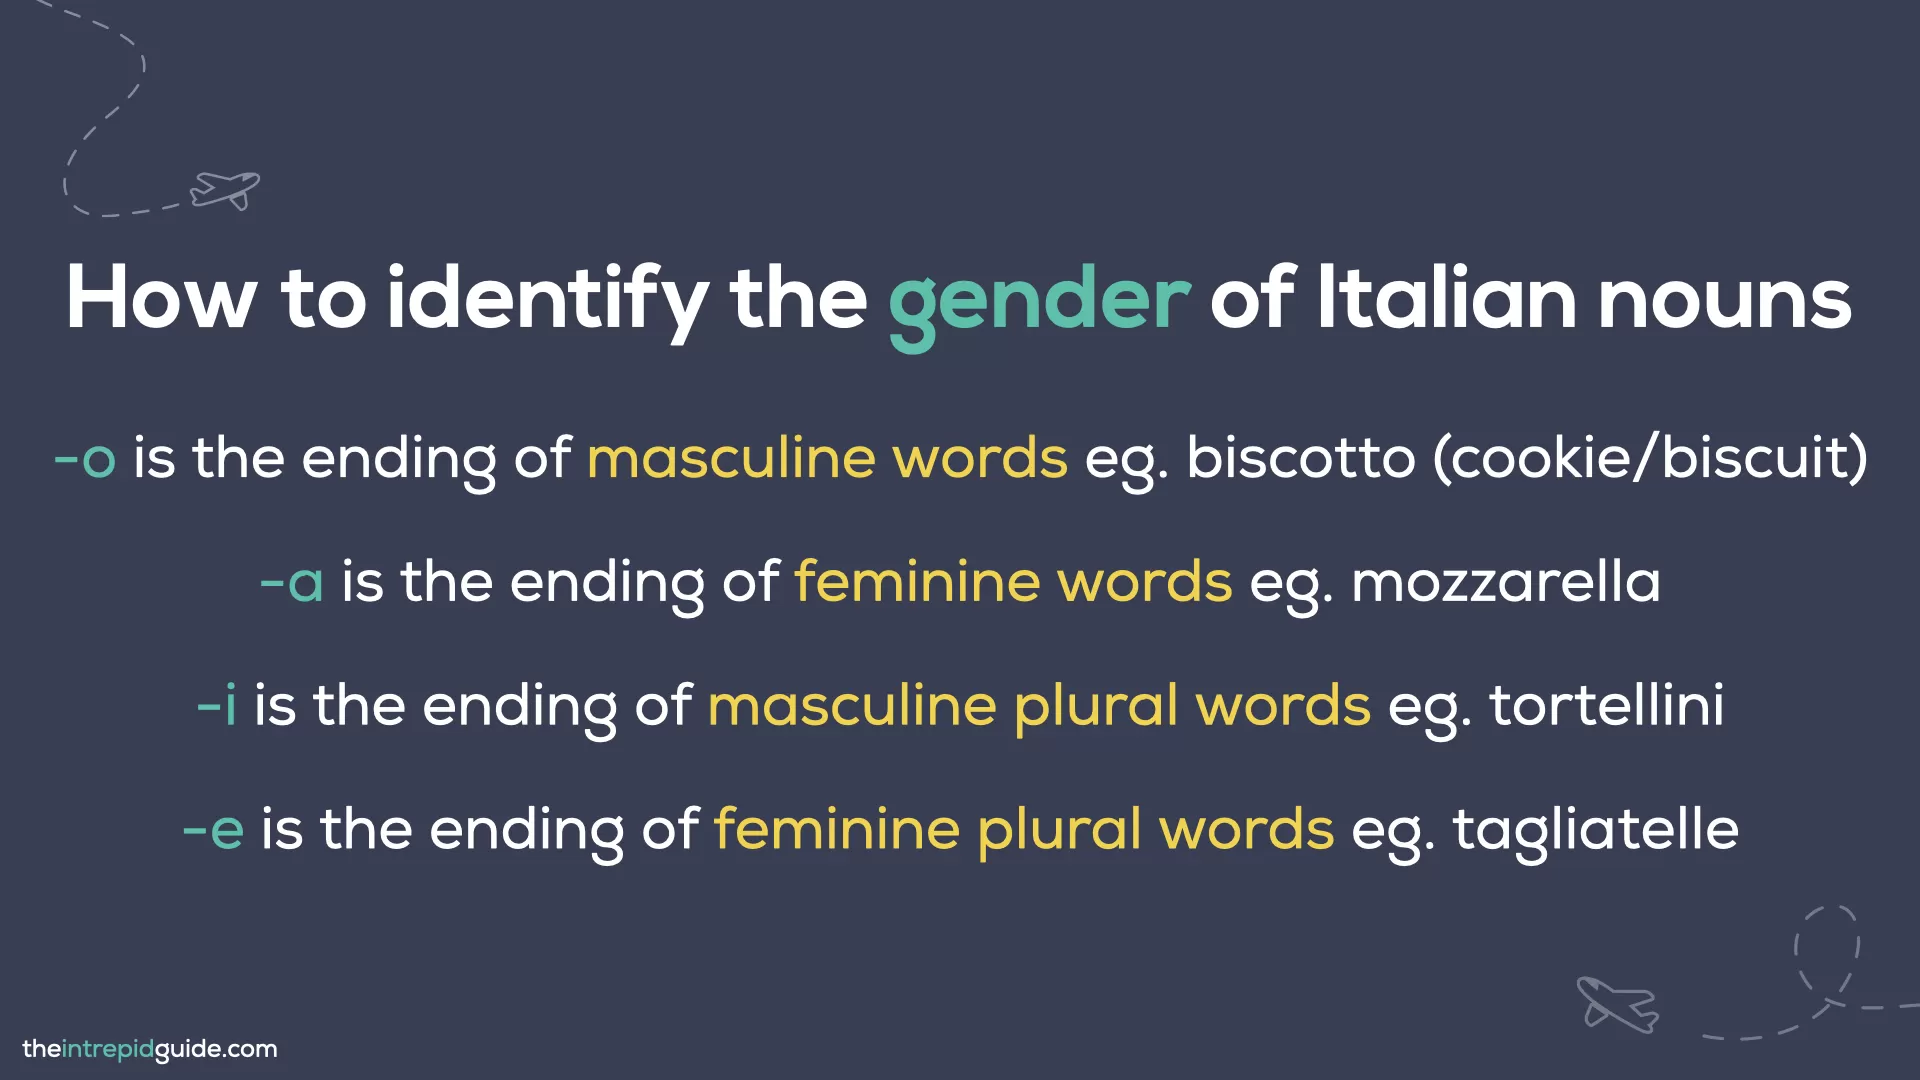 Gender of Italian nouns guide - How to identify the gender of Italian nouns